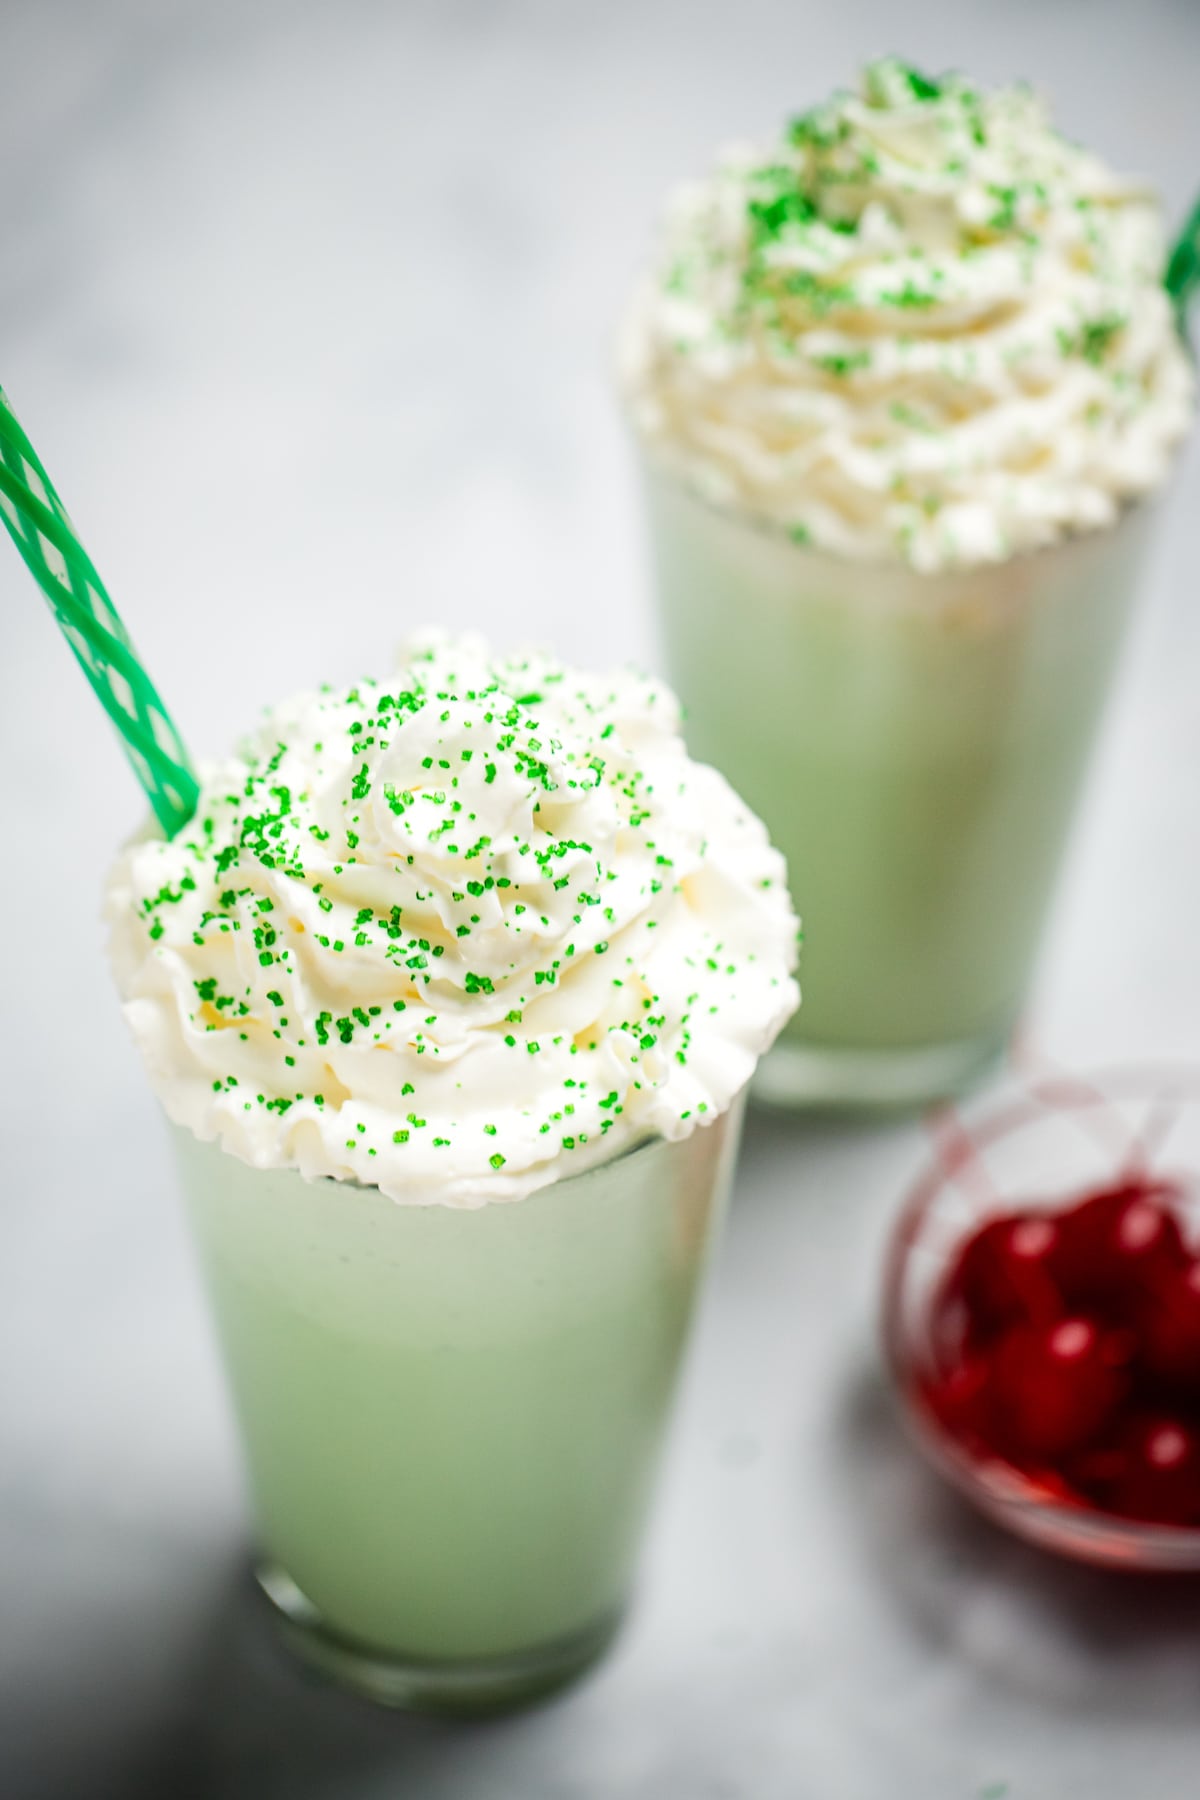 A tall glass with shamrock shake topped with whipped cream and sprinkles, next to a bowl of maraschino cherries. There is another shake in the background, and they both have straws.